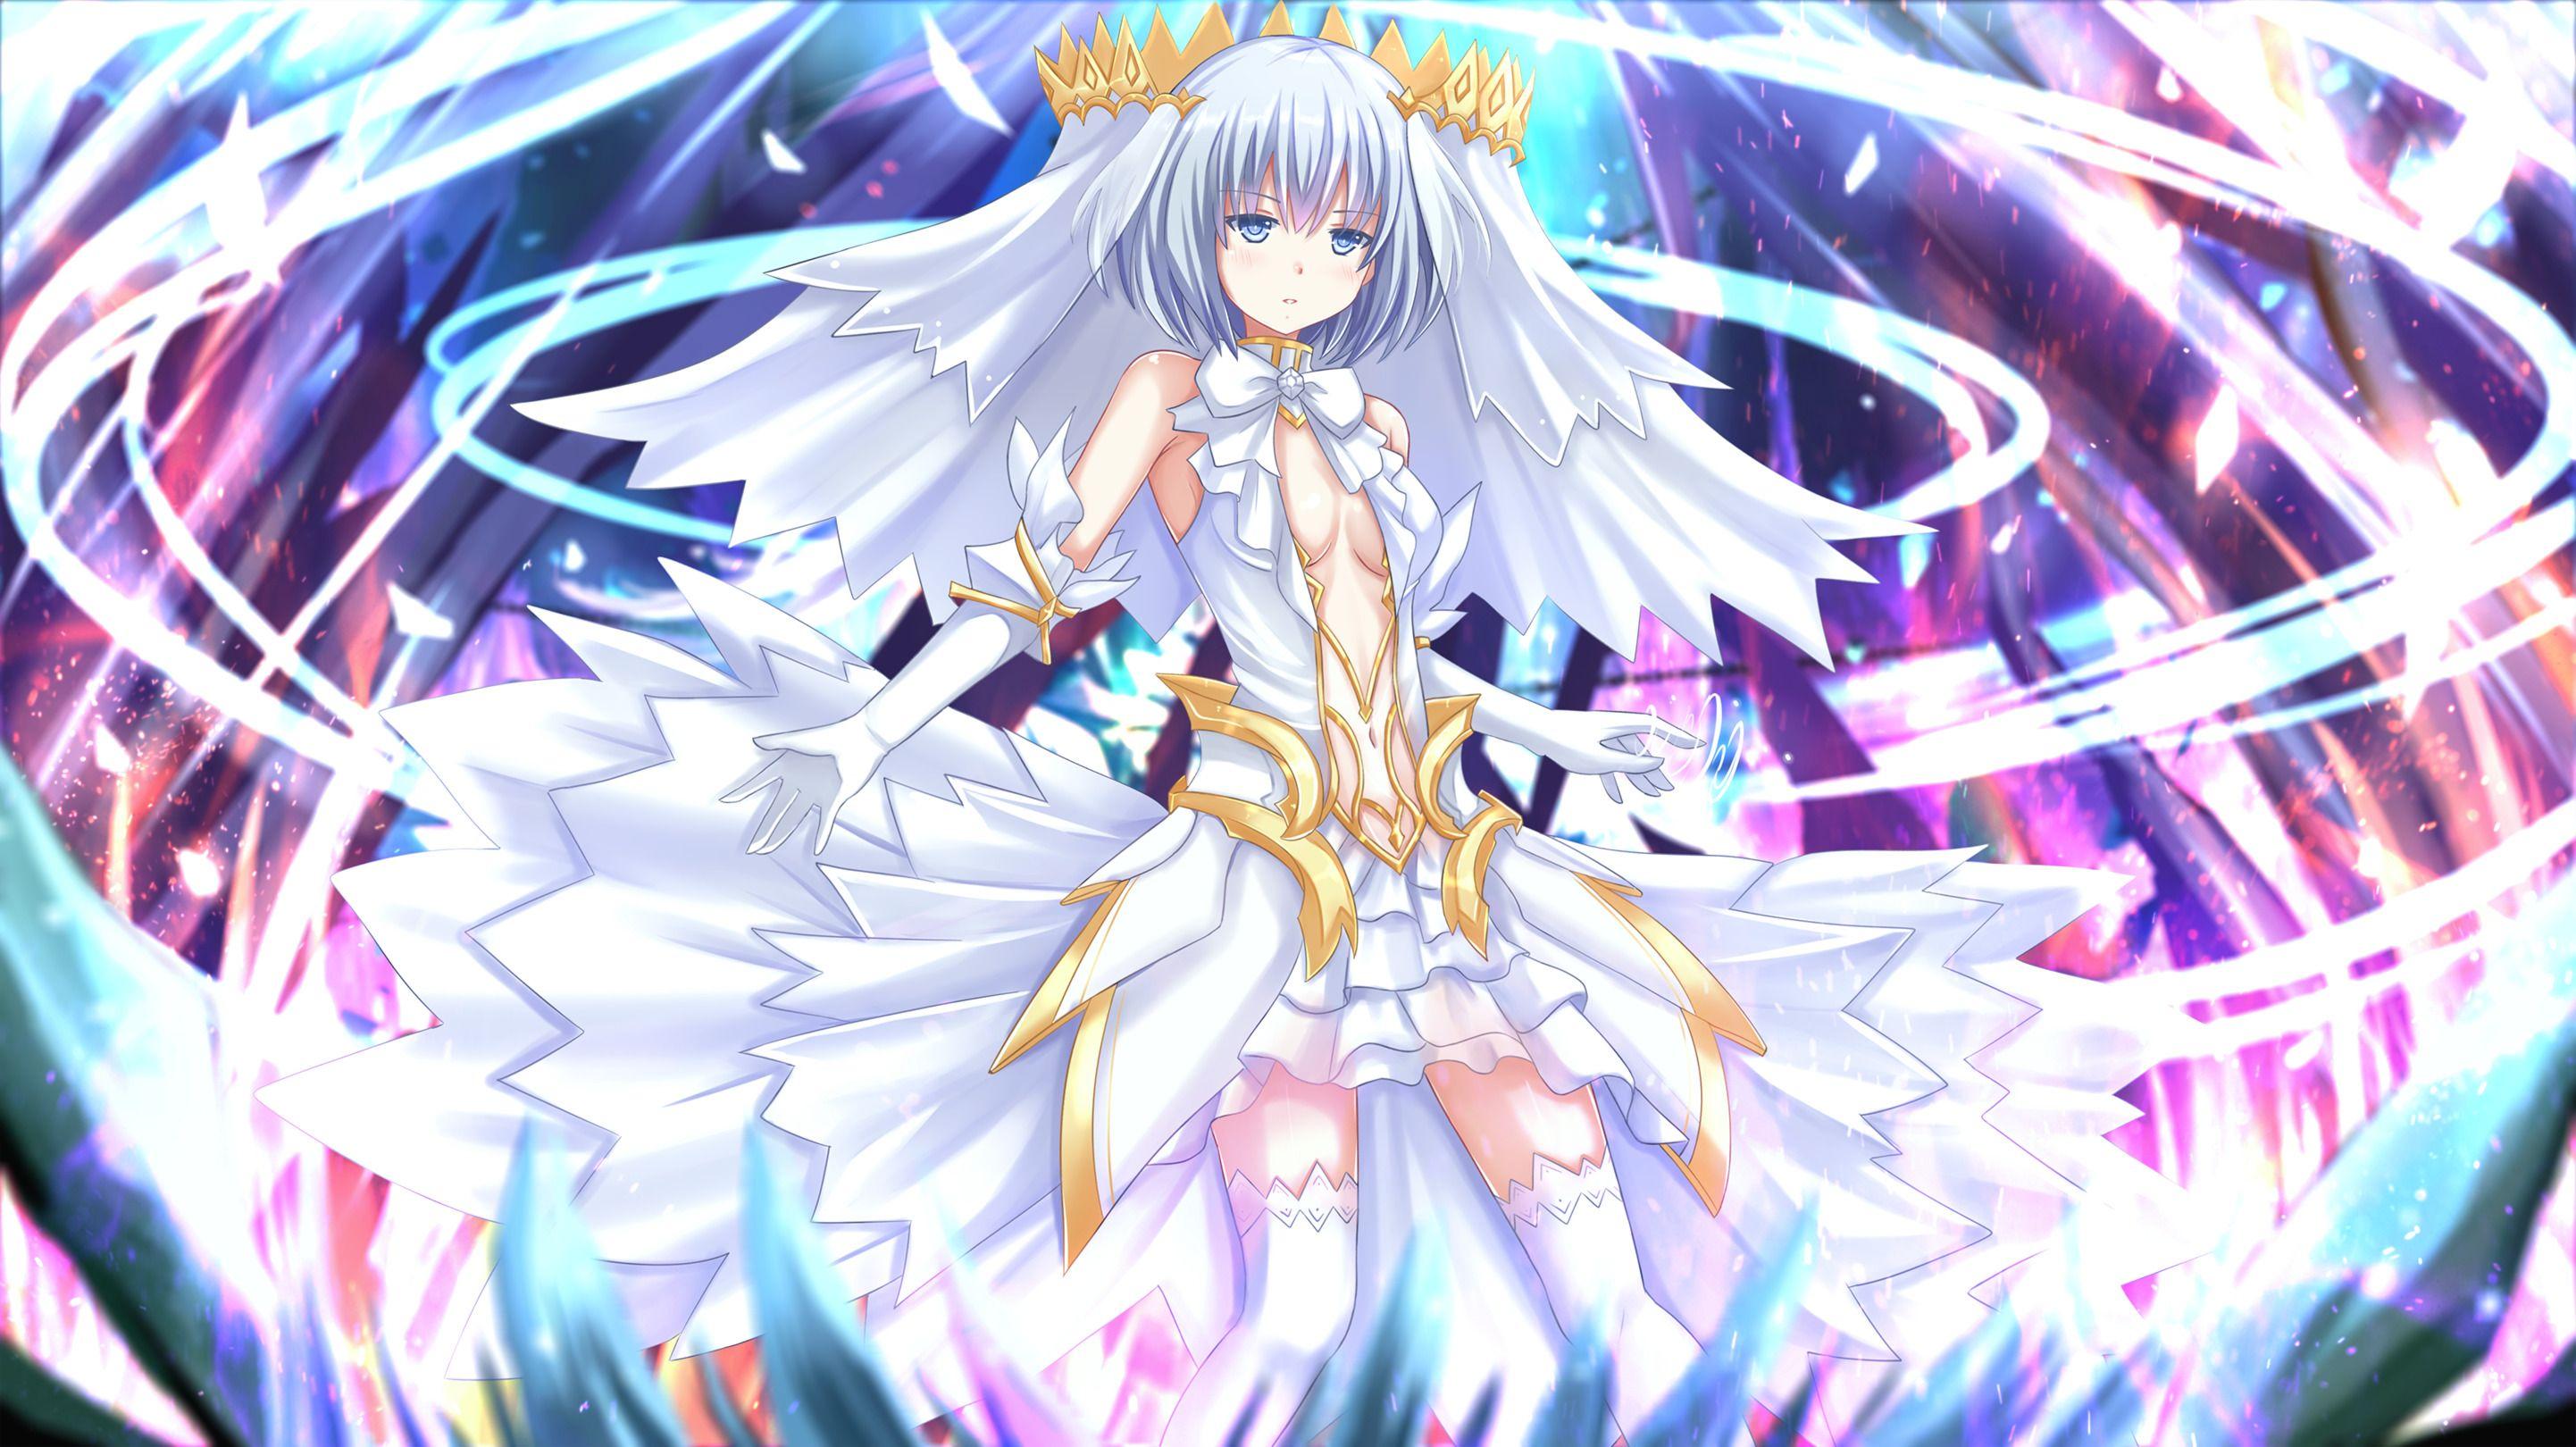 Date a Live Anime Wallpaper Free Date a Live Anime